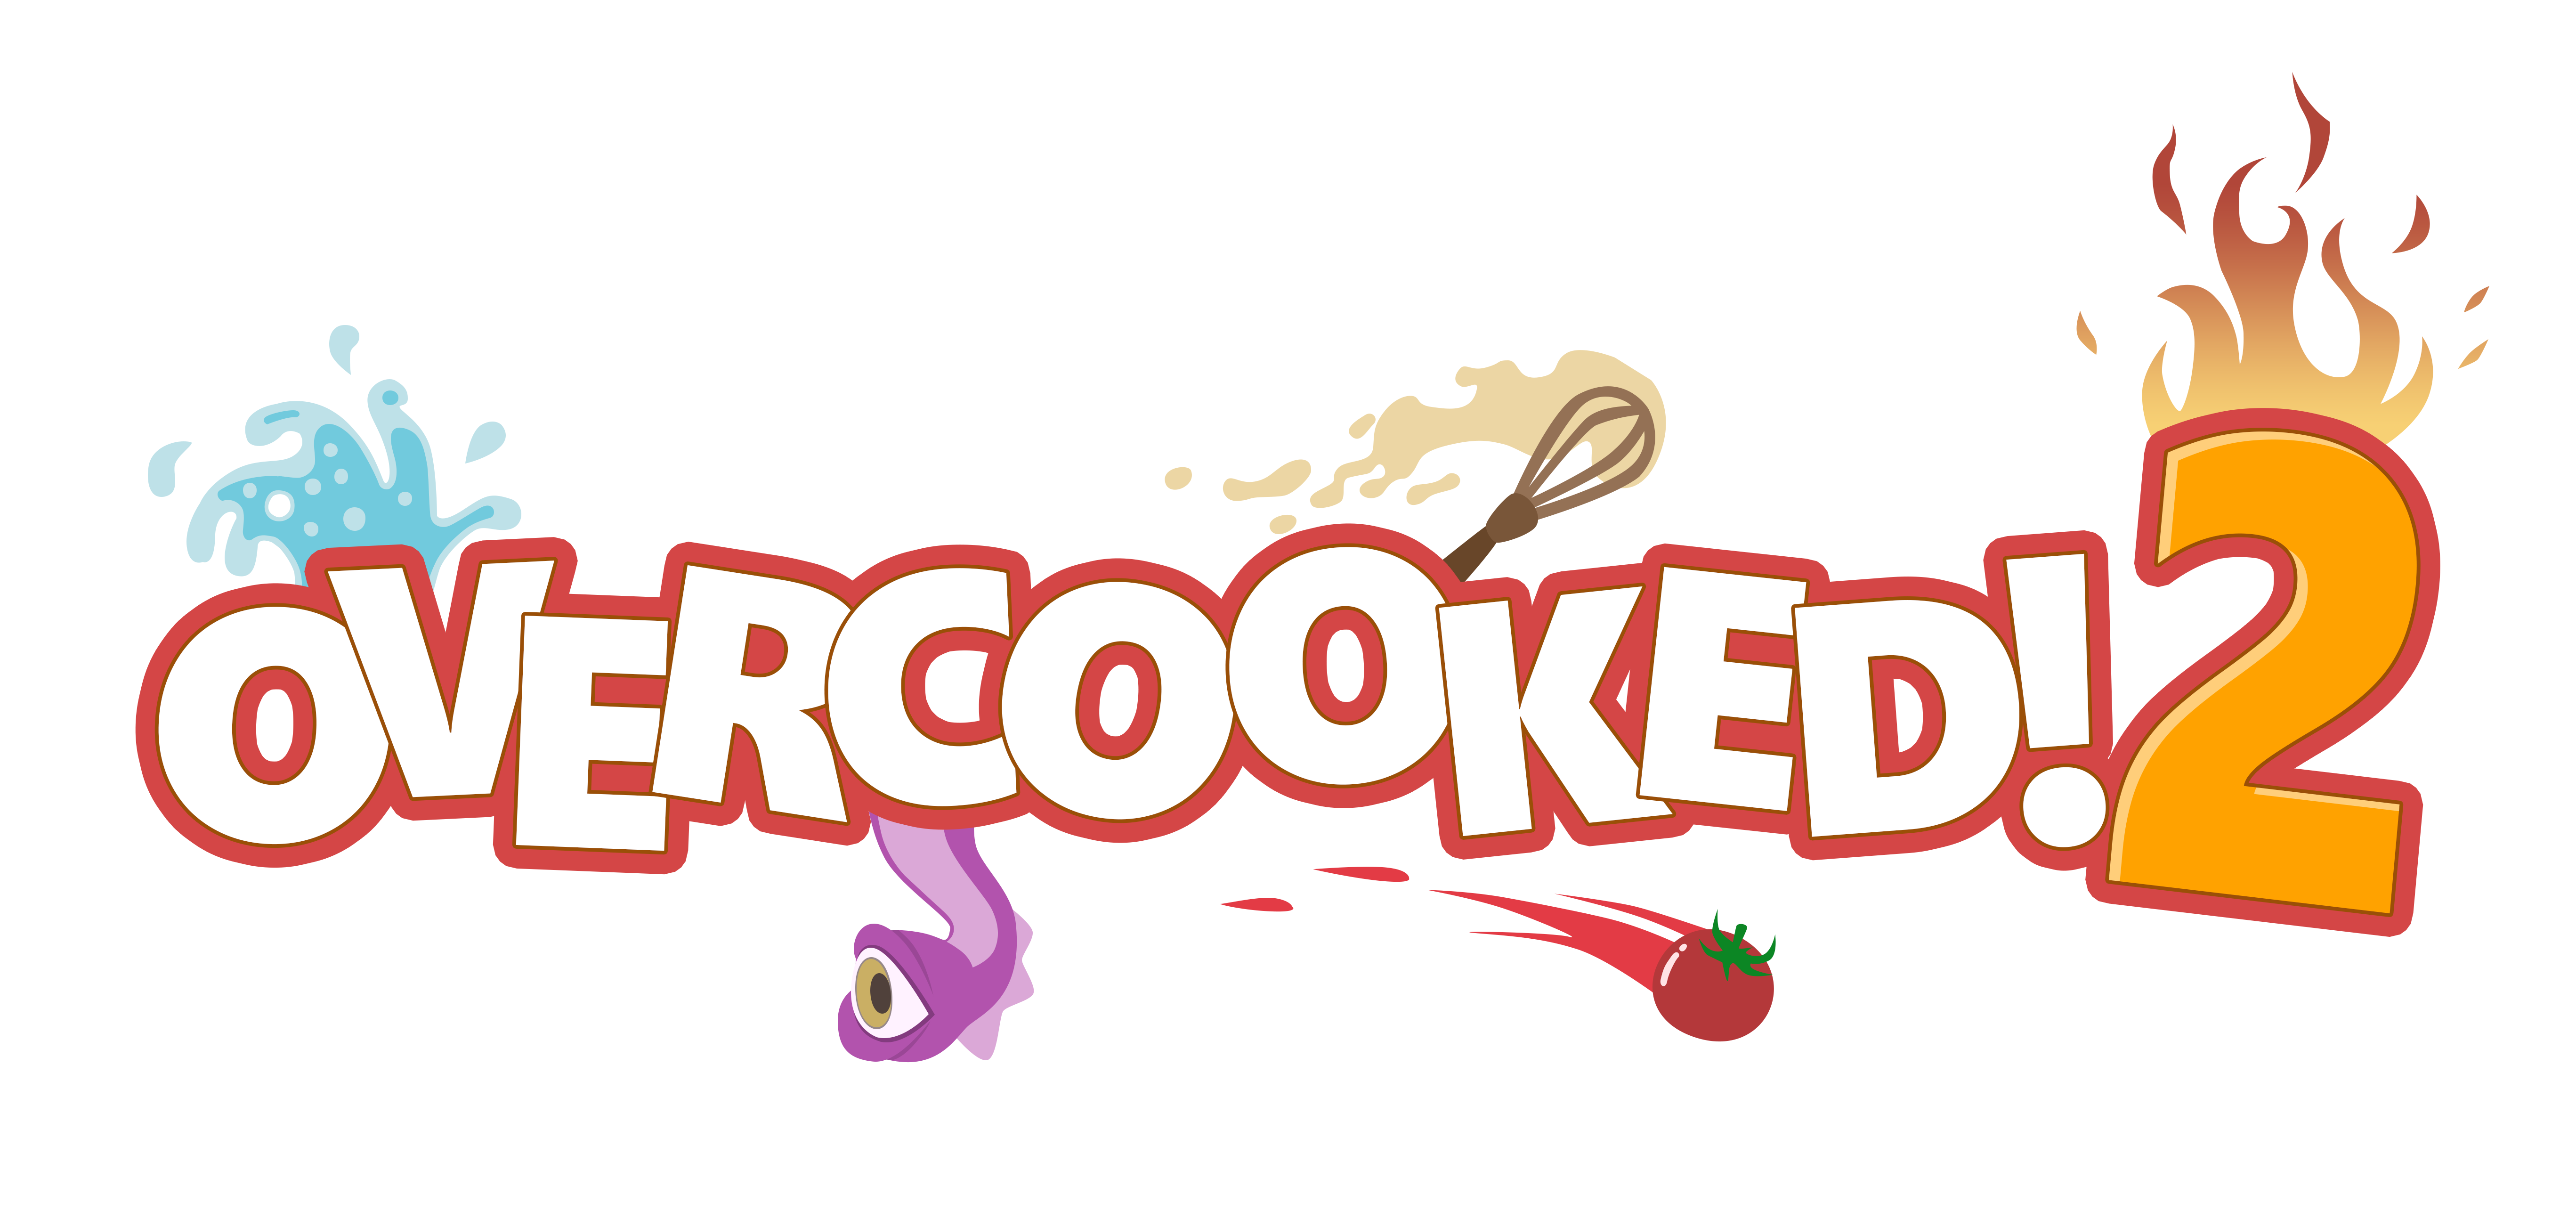 Overcooked!-2-full-game-cracked